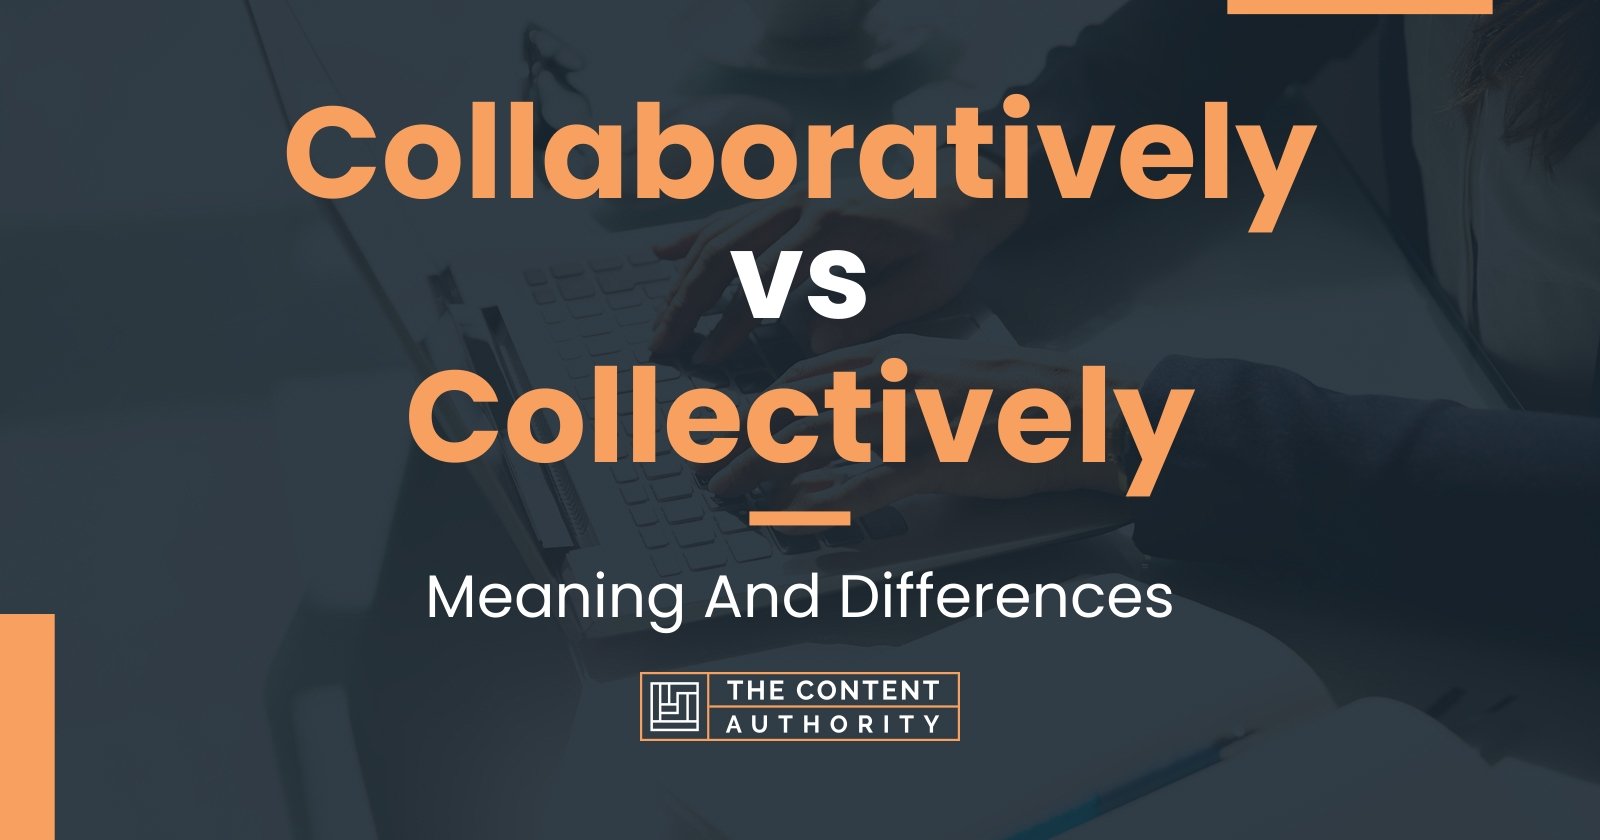 Collaboratively vs Collectively: Meaning And Differences